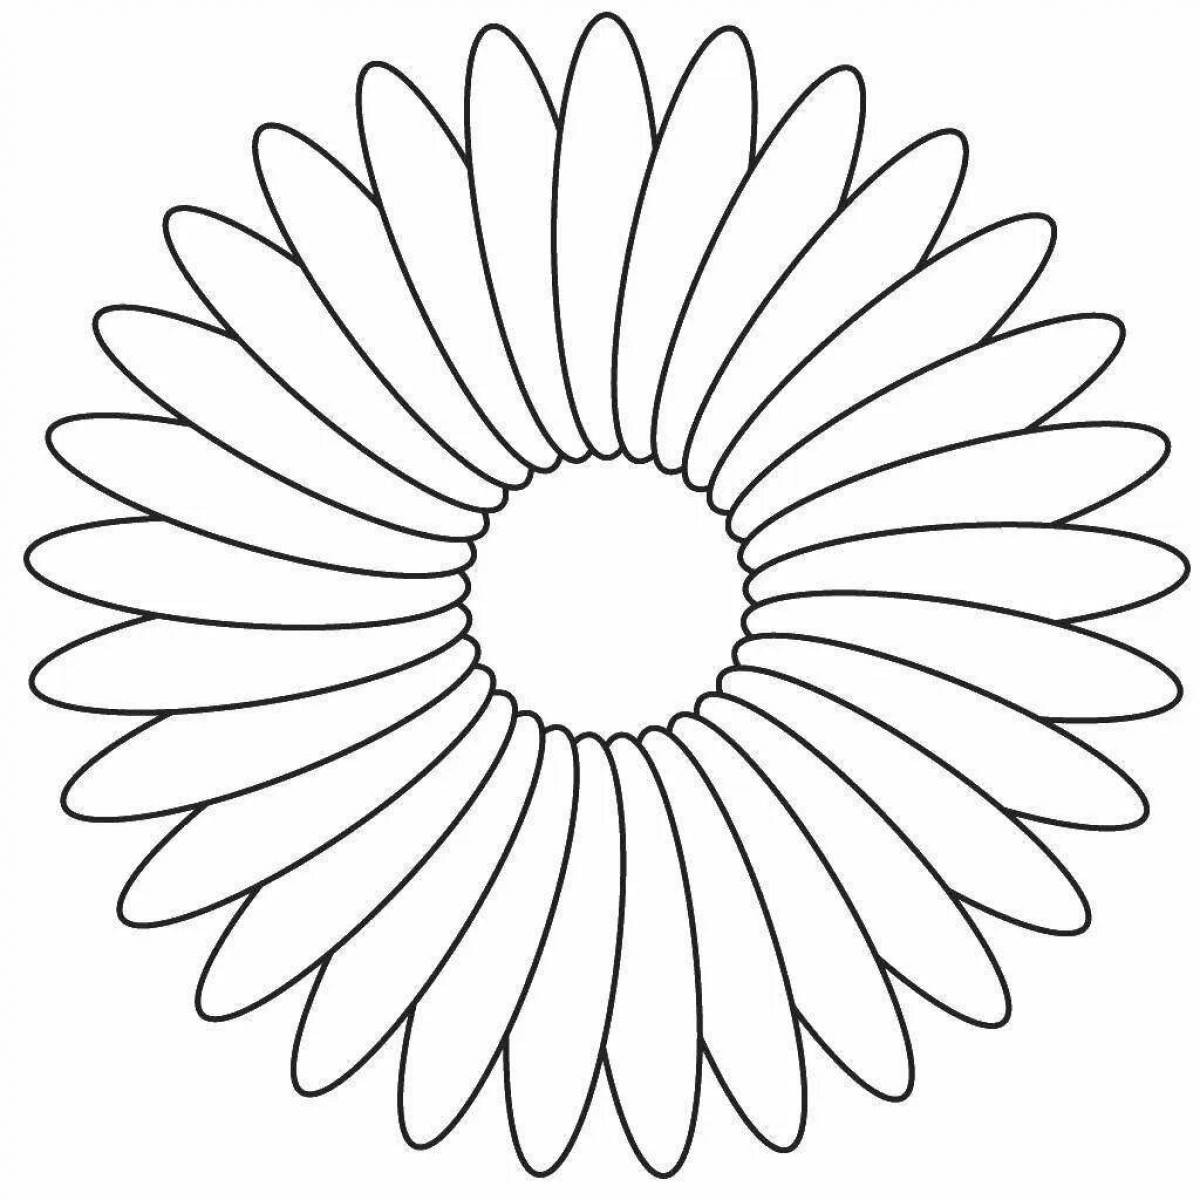 Exuberant chamomile flowers coloring book